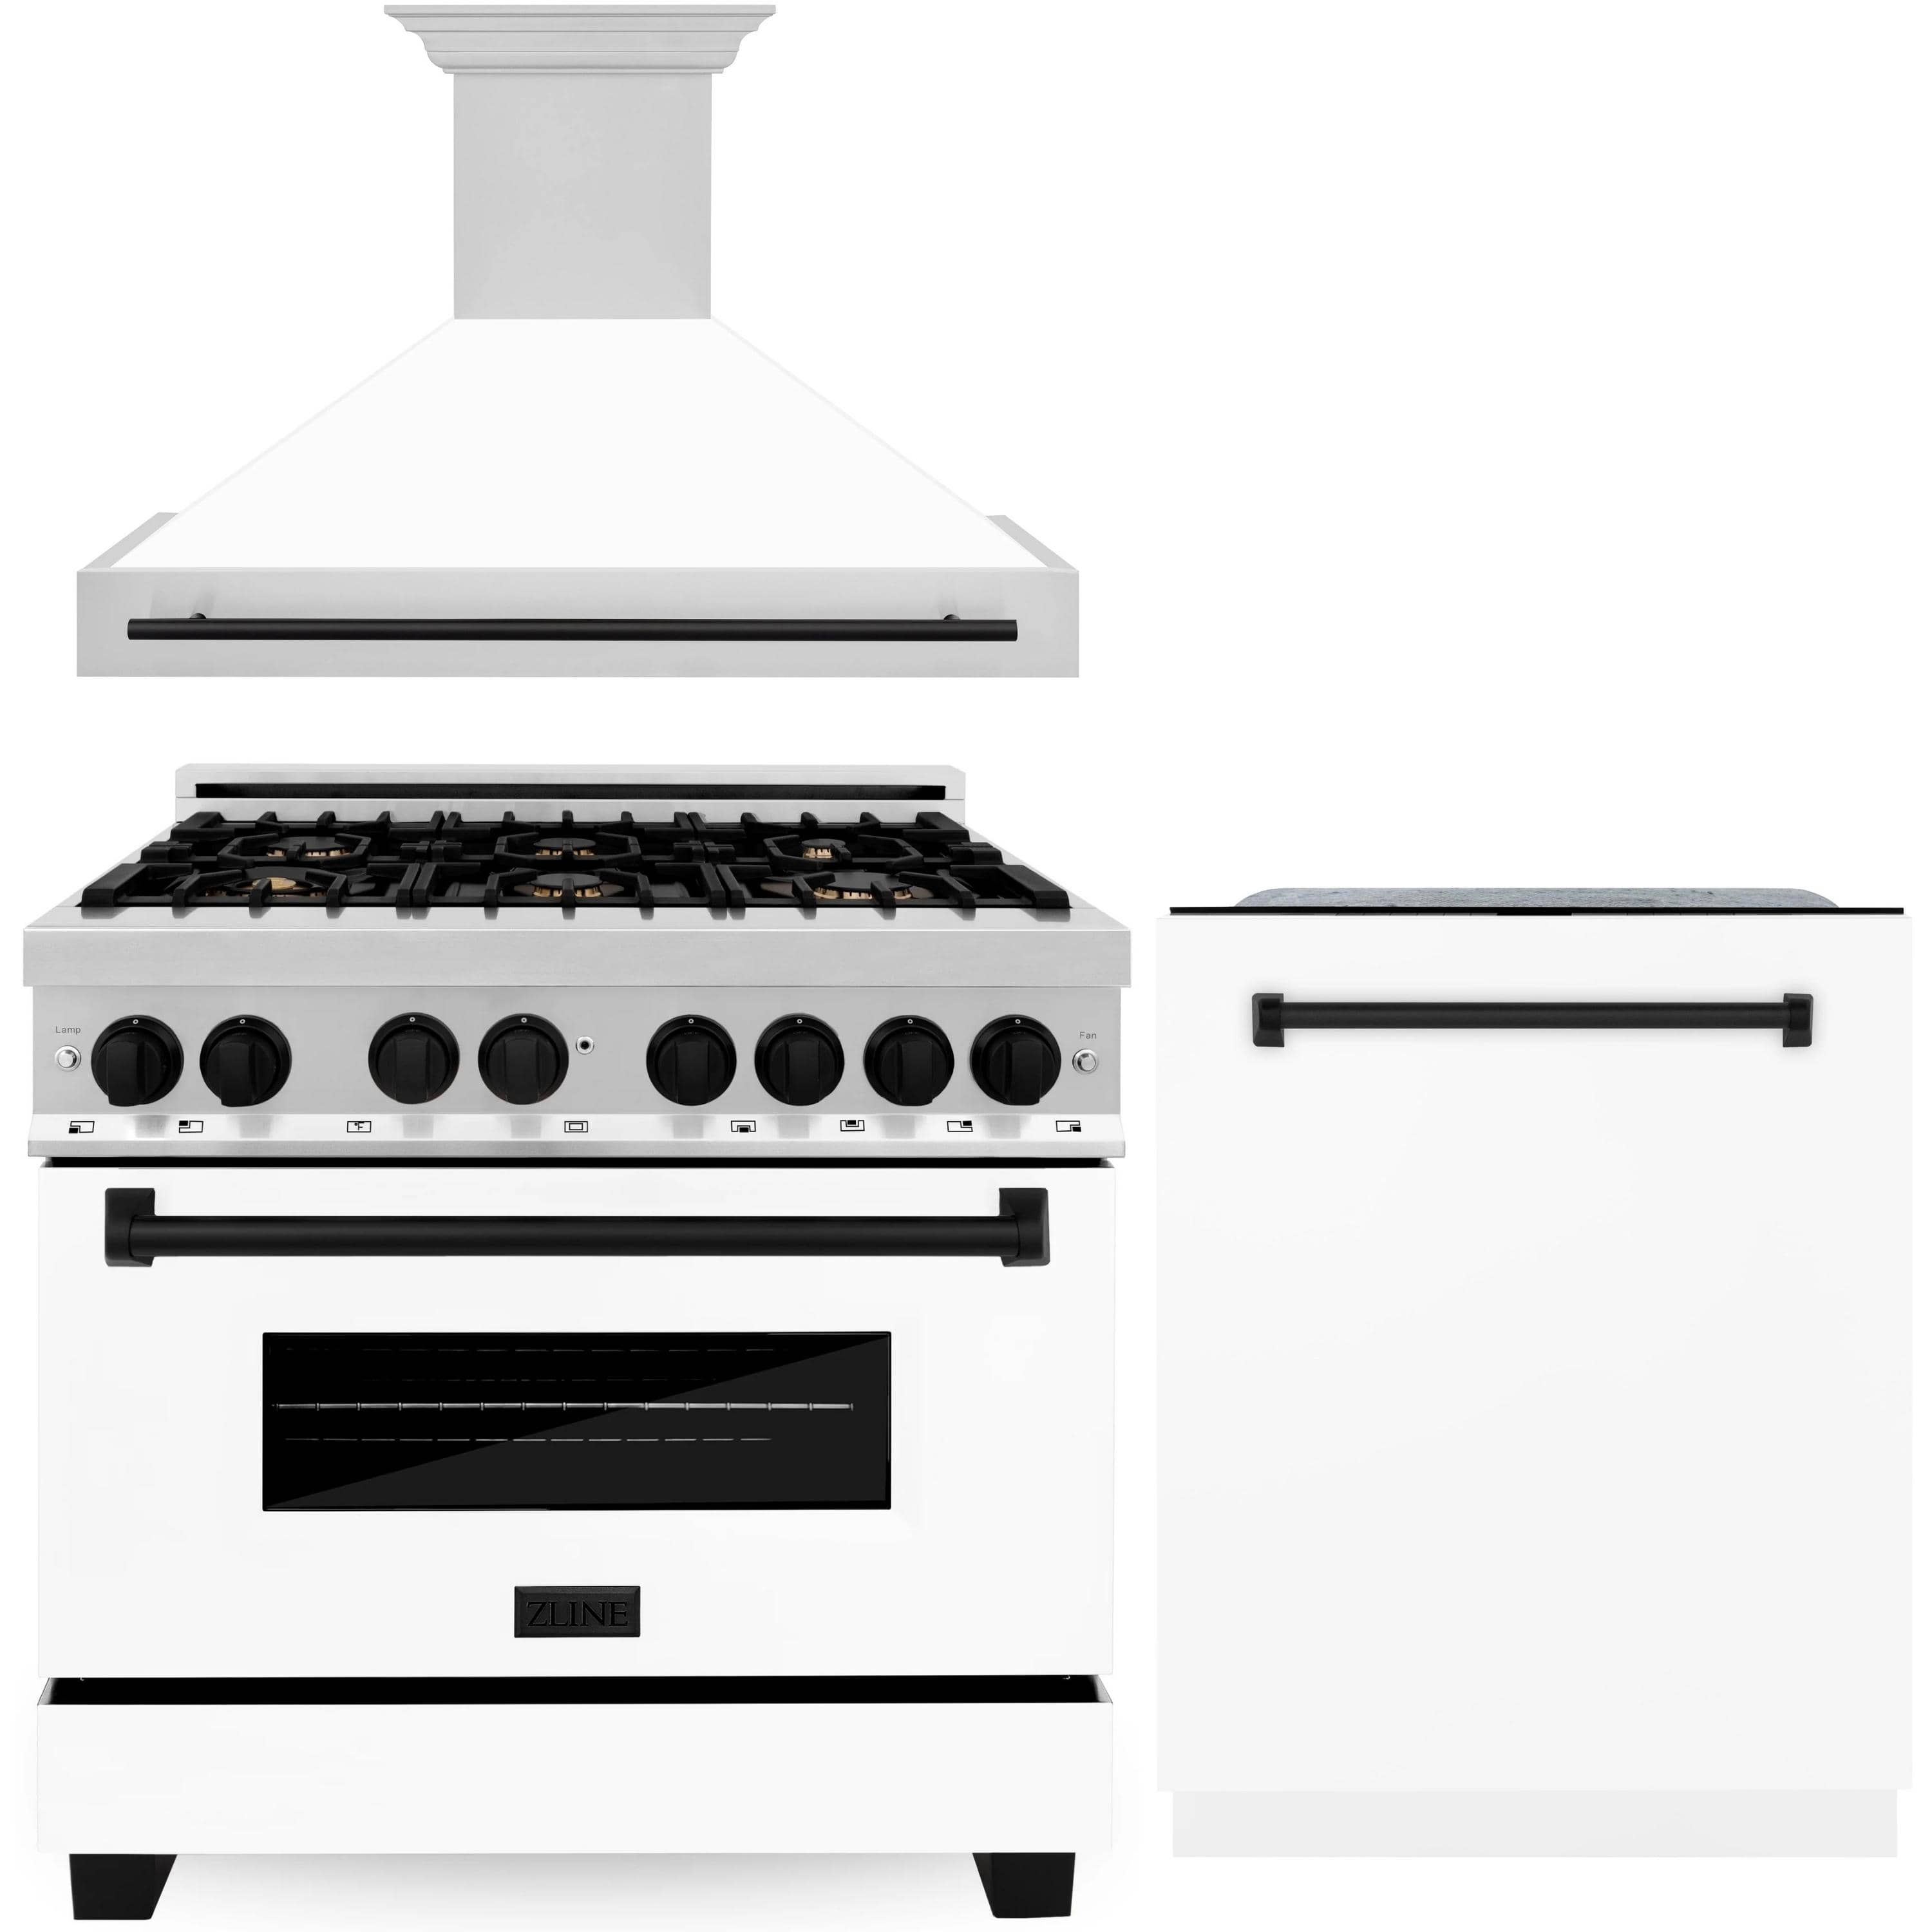 ZLINE Autograph Edition 3-Piece Appliance Package - 36-Inch Dual Fuel Range, Wall Mounted Range Hood, & 24-Inch Tall Tub Dishwasher in Stainless Steel and White Door with Matte Black Trim (3AKP-RAWMRHDWM36-MB)